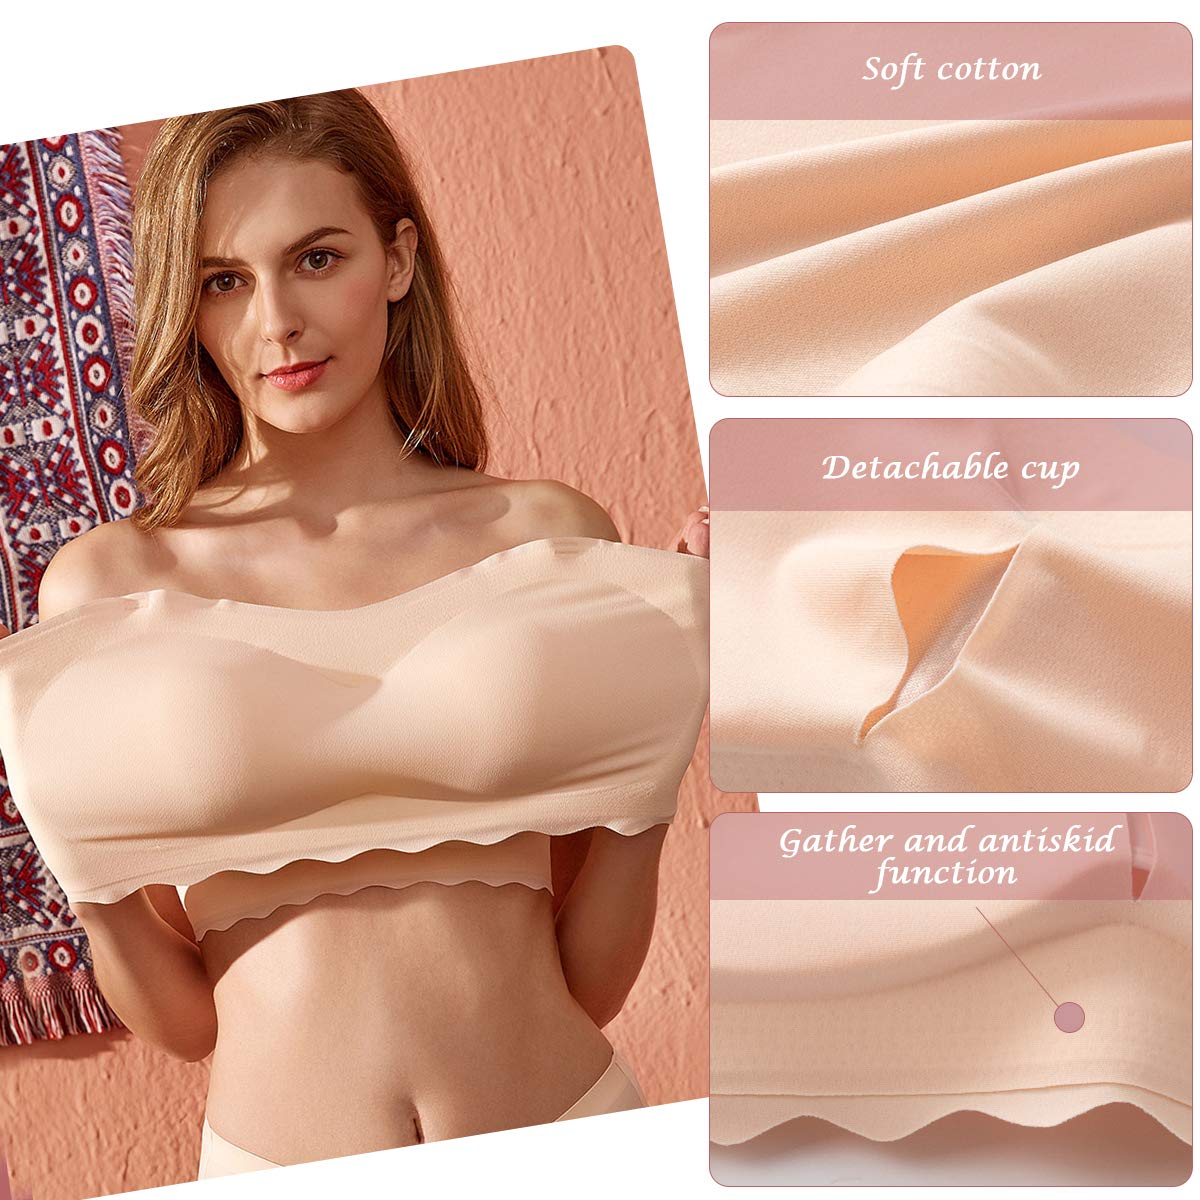 Invisi Fit strapless bandeau bra in barely beige